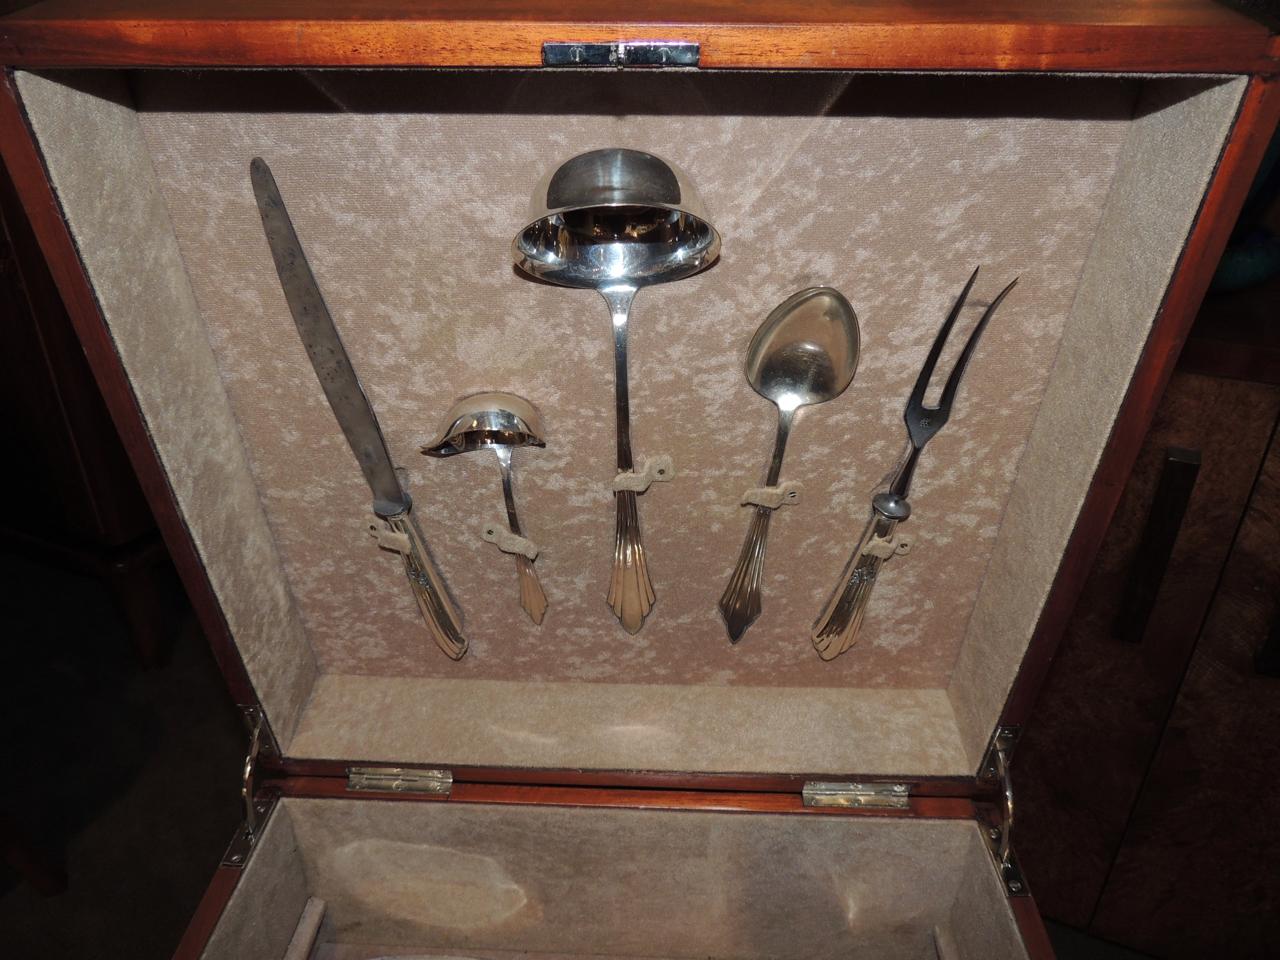 Complete Silverware Set by WMF in Art Deco Box In Good Condition For Sale In Oakland, CA